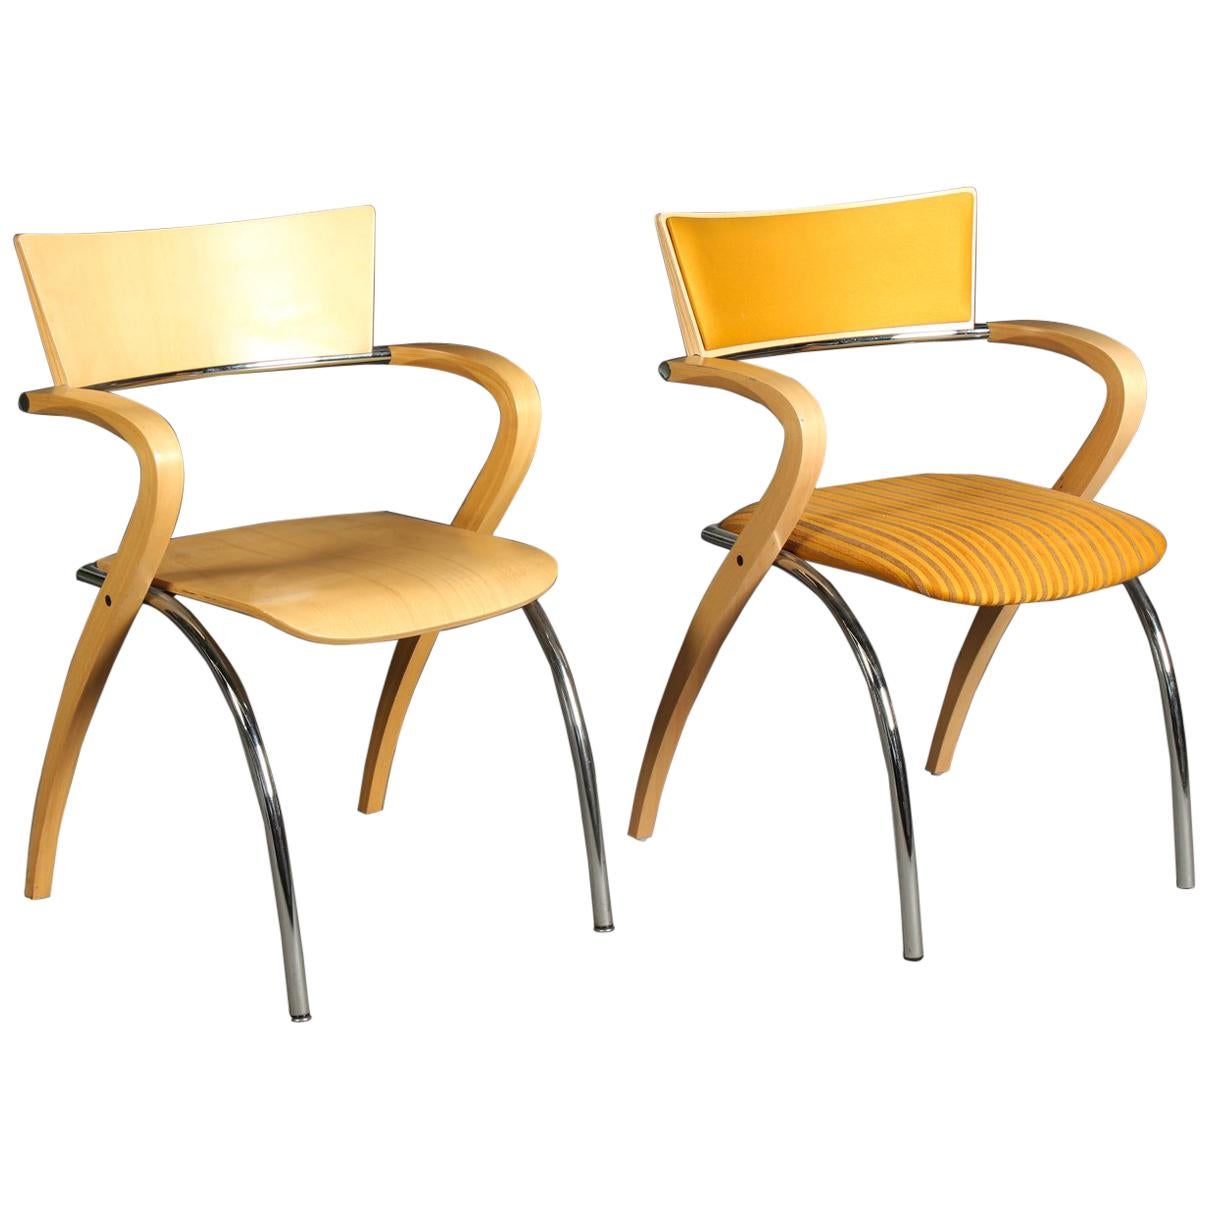 Pair of "Golf" Chairs by Francesco Zaccone